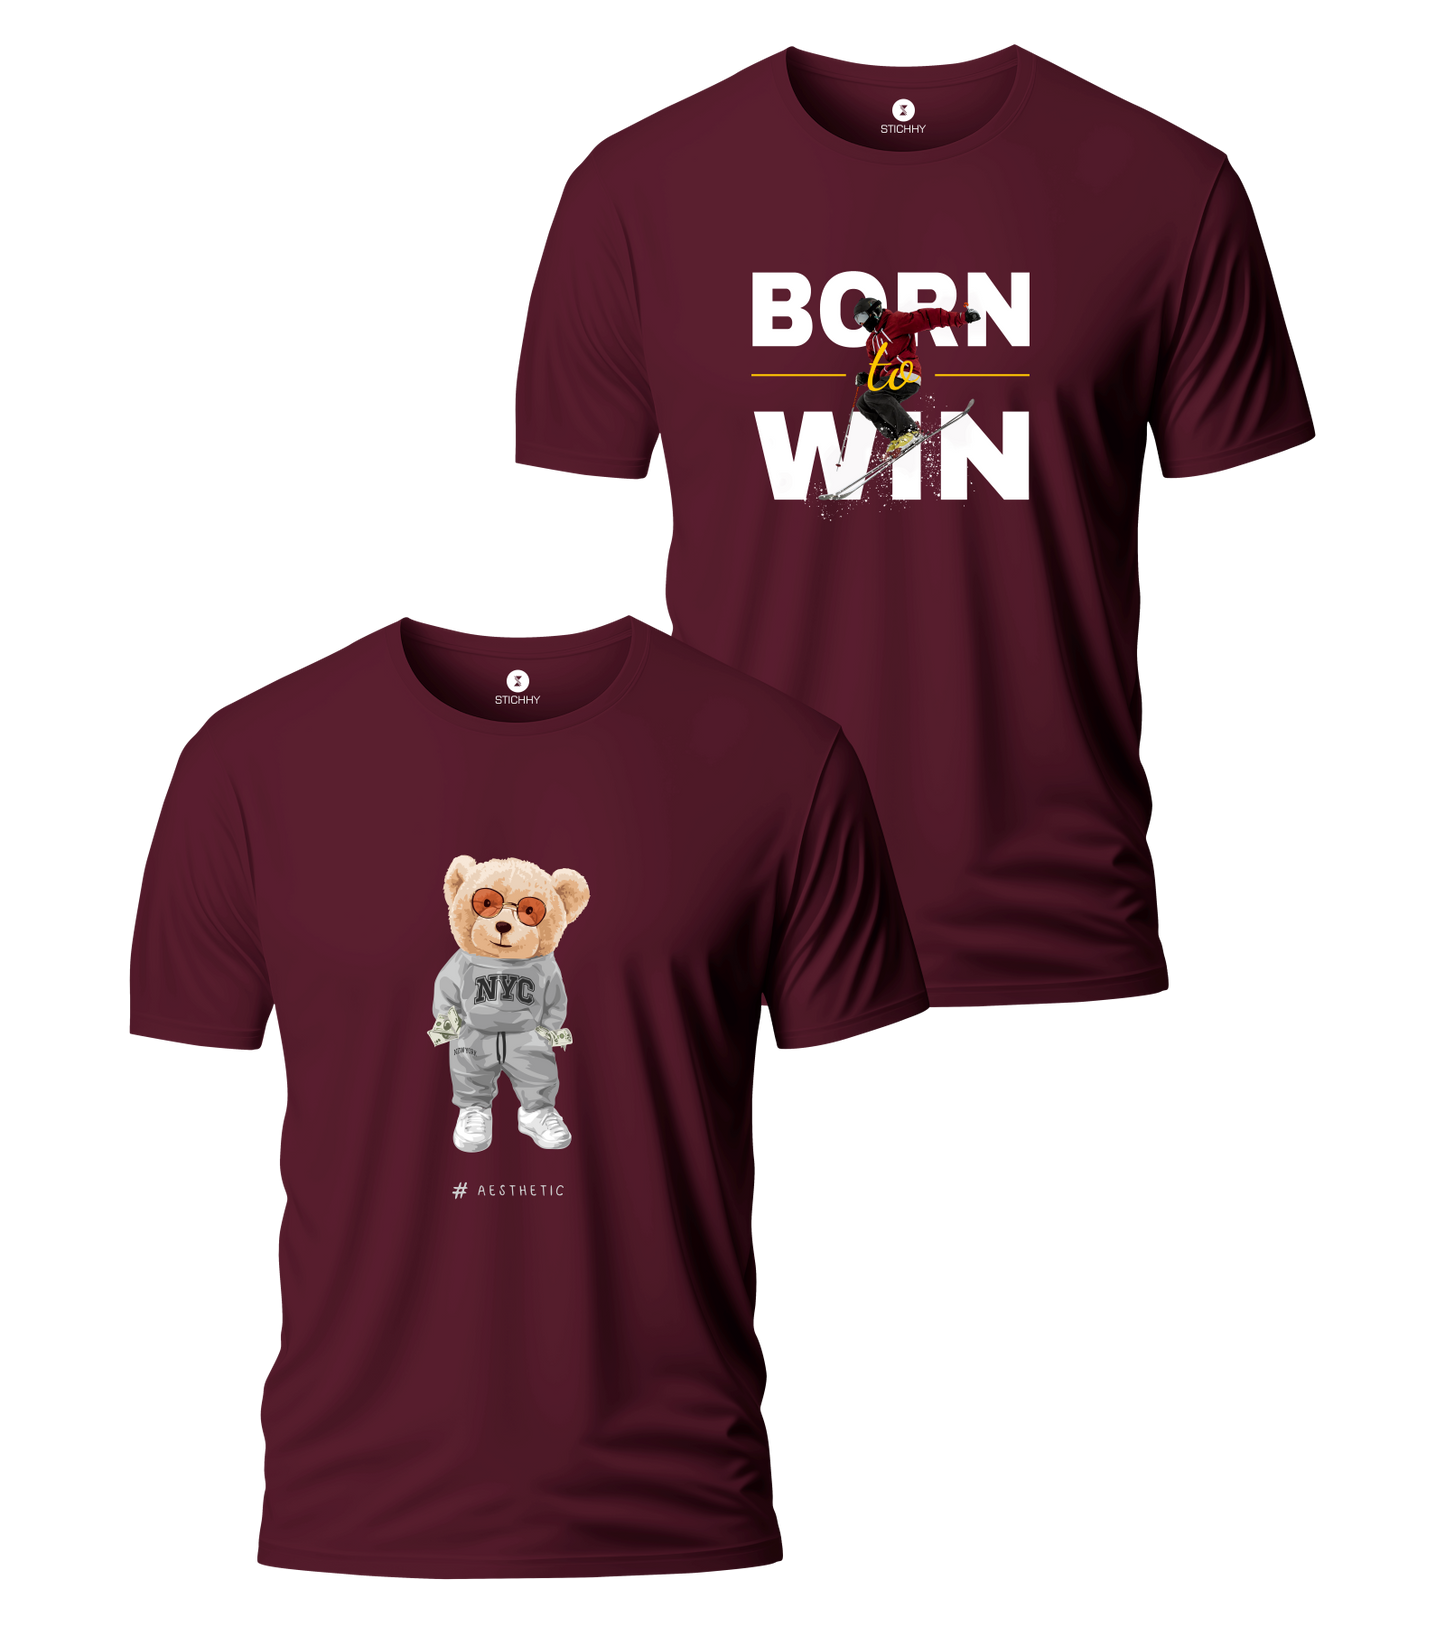 AESTHETIC & BORN TO WIN T-SHIRT BUY 1 GET 1 FREE